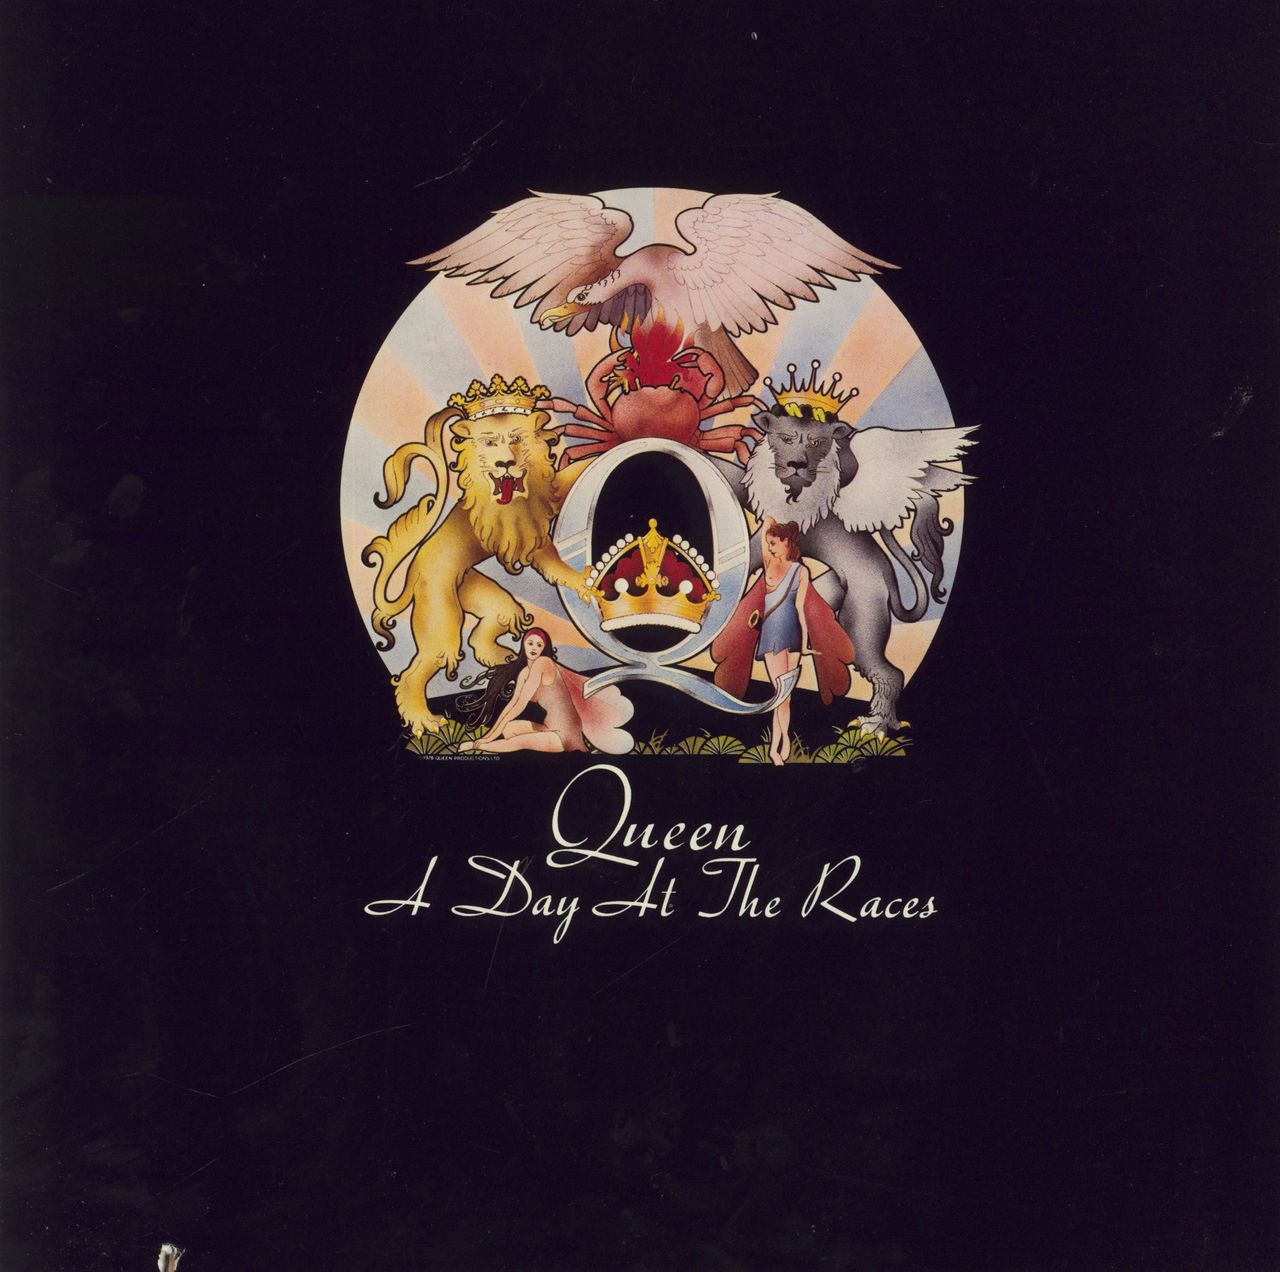 Queen A Day At The Races - Deletion Marked Sleeve US vinyl LP album (LP record) 6E-101